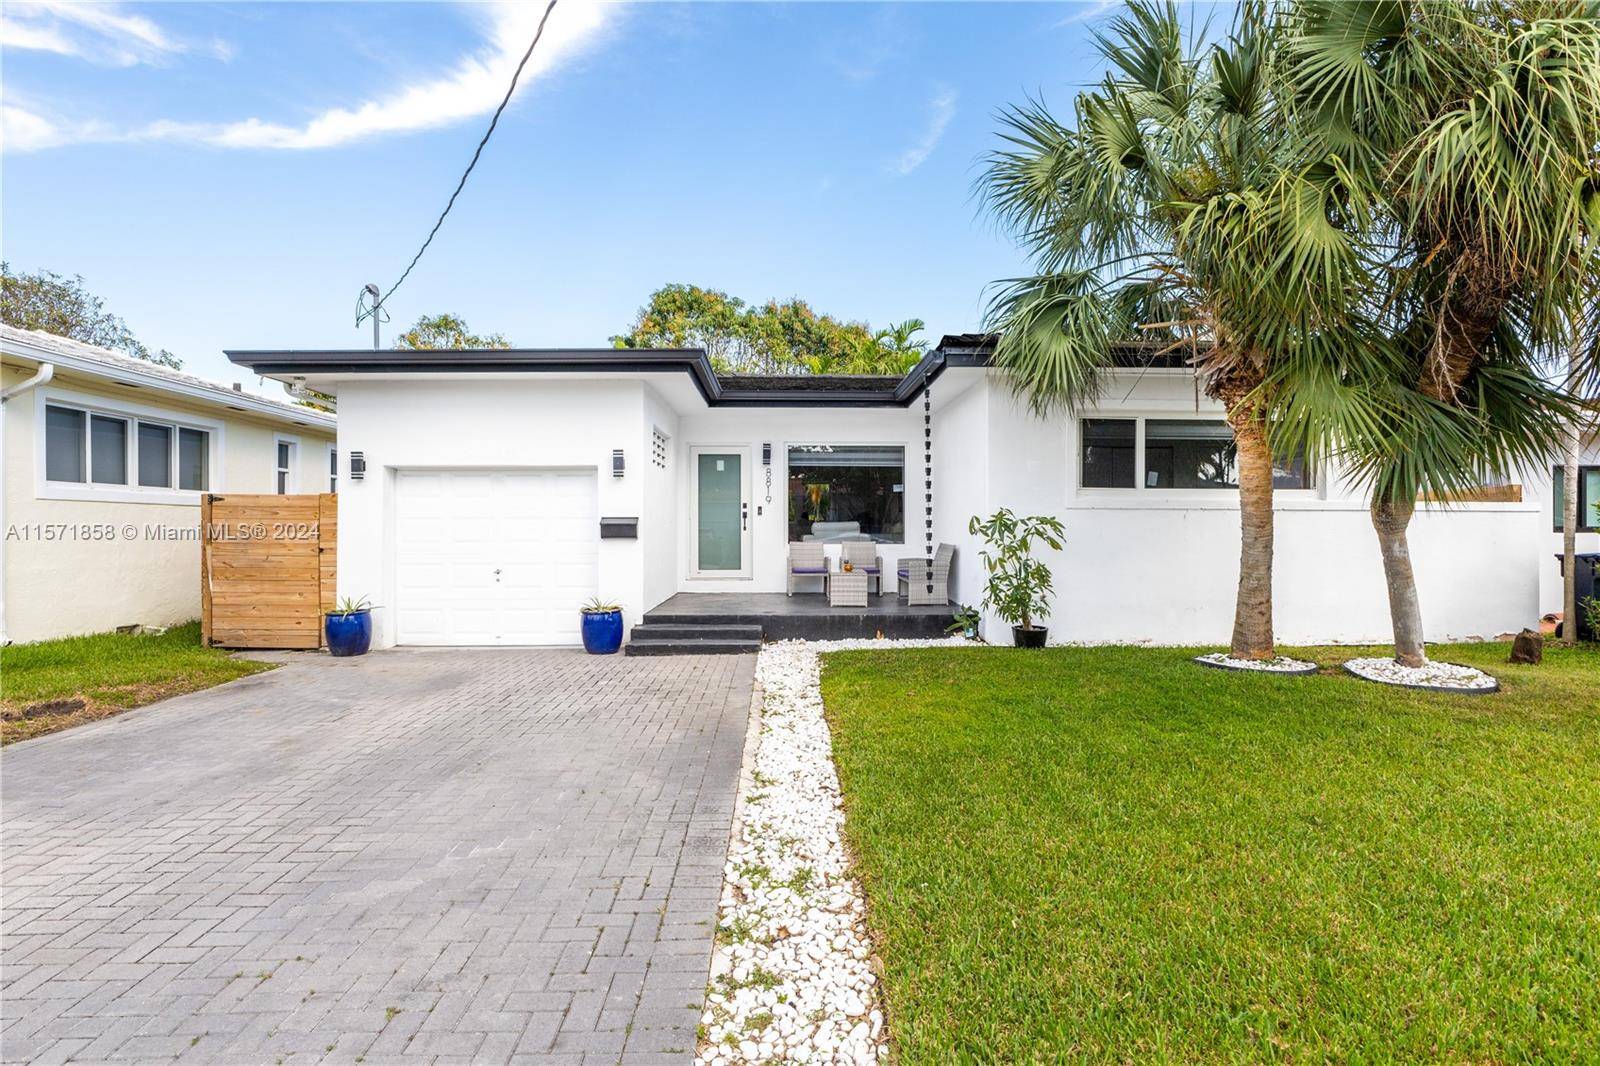 Charming, renovated, 3 bedroom, 2 bathroom home located in the quiet part of beautiful Surfside, a few blocks away from the beach.